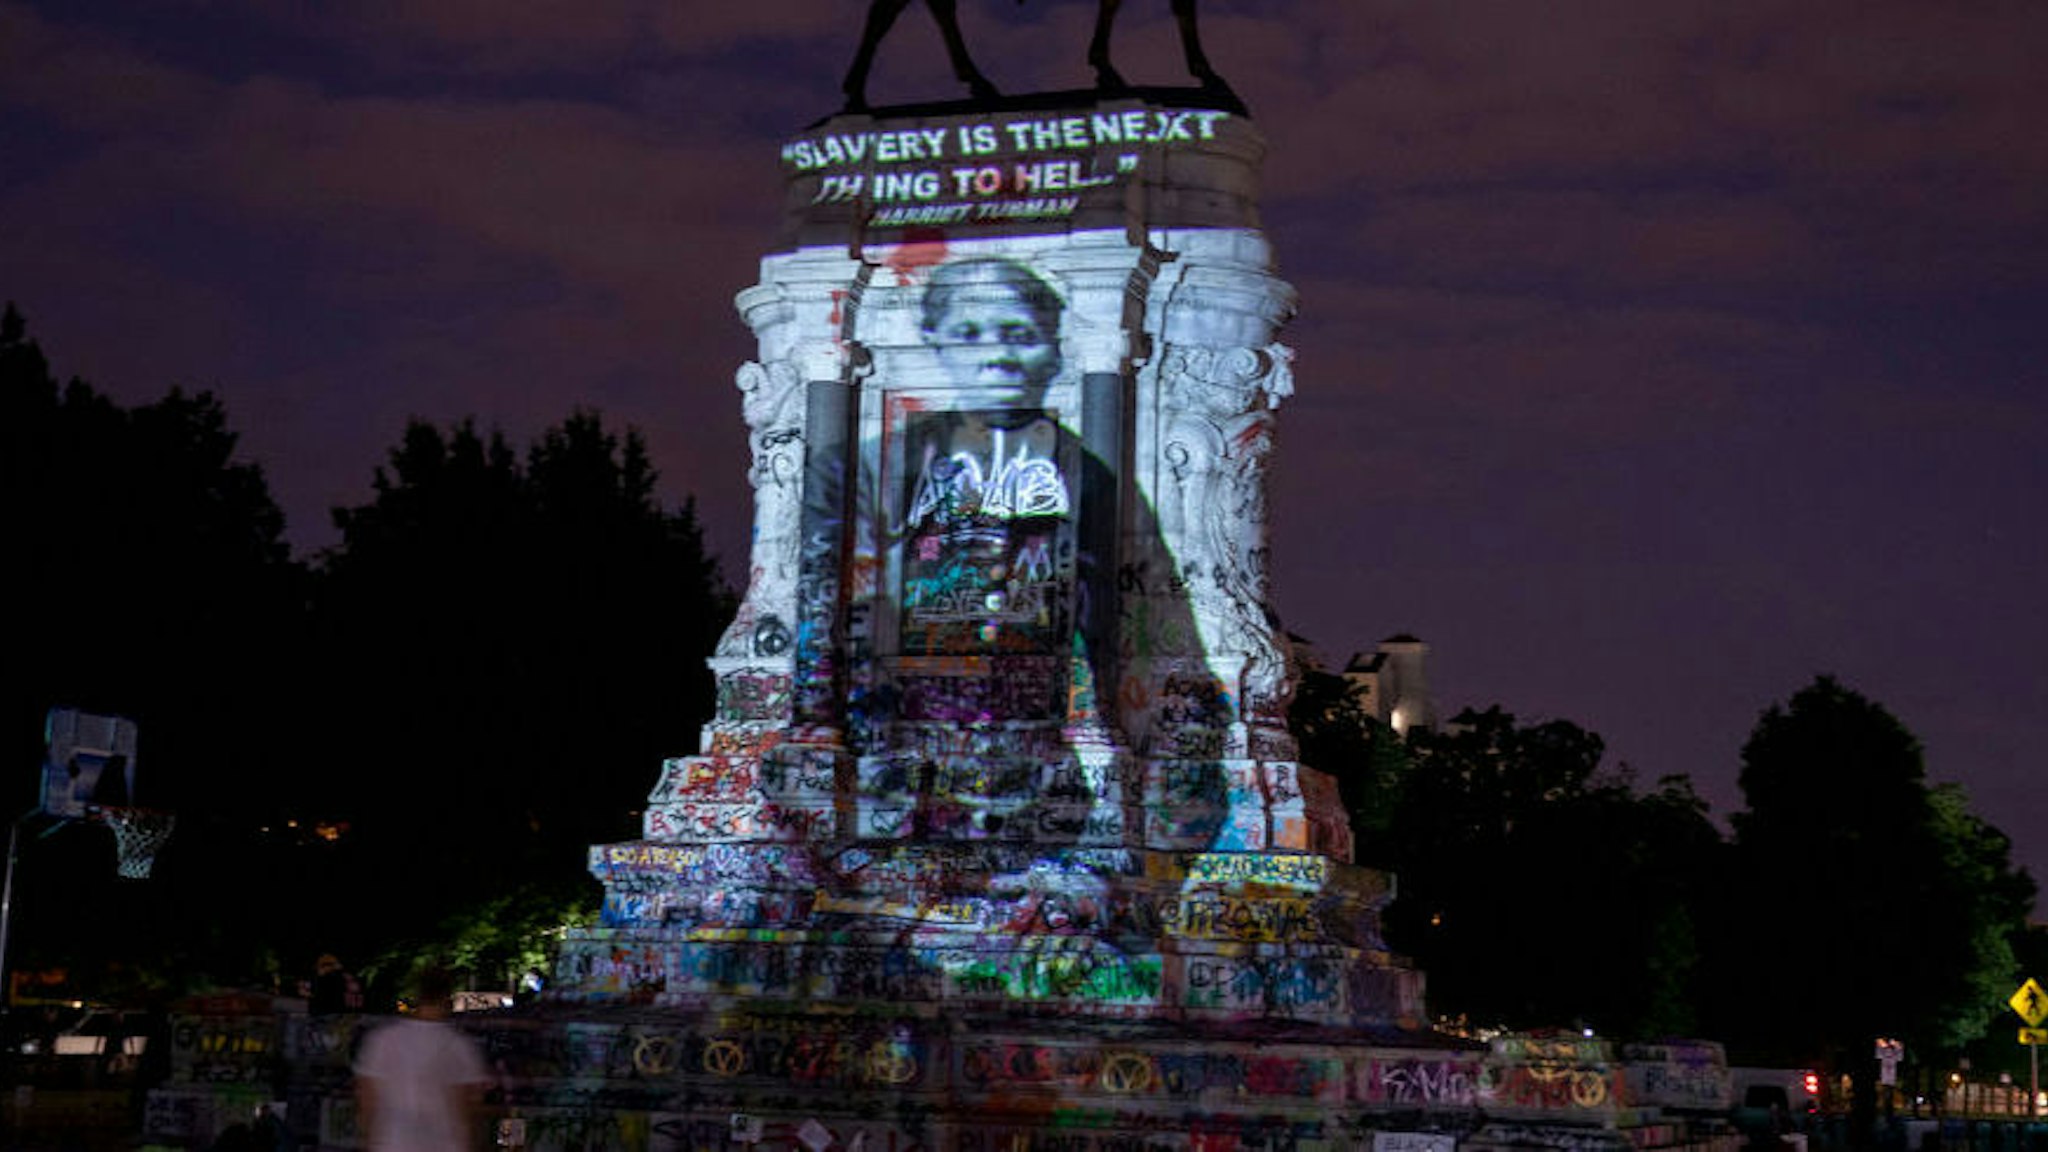 RICHMOND, VIRGINIA - JUNE 18: Harriet Tubman's image is projected on the Robert E. Lee Monument as people gather around on June 18, 2020 in Richmond, Virginia. Richmond Circuit Court Judge Bradley Cavedo ruled on Thursday to indefinitely extended an injunction preventing the Virginia governor from removing a historic statue of Confederate Gen. Robert E. Lee from Richmond's famed Monument Avenue (Photo by Tasos Katopodis/Getty Images)